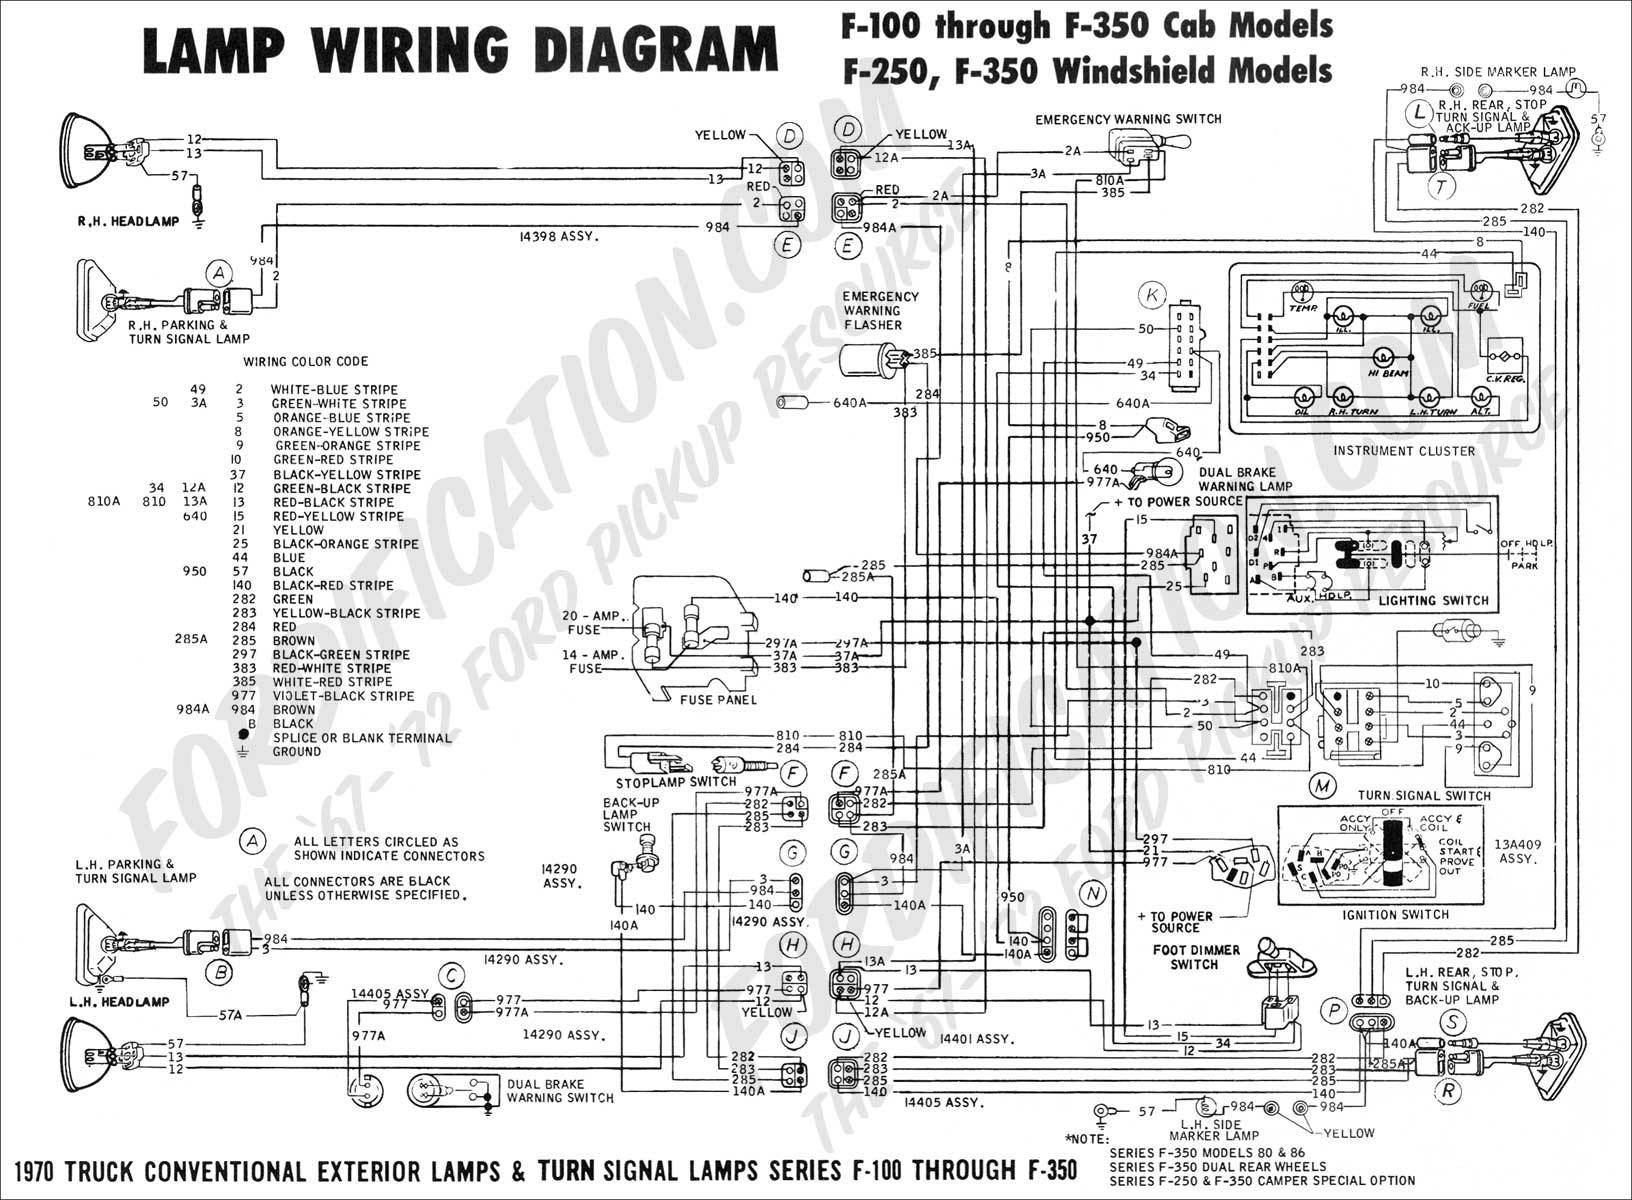 Wiring Diagram for ford F150 Trailer Lights From Truck Trailer to ford F350 Wiring Diagram Wiring Diagram Of Wiring Diagram for ford F150 Trailer Lights From Truck